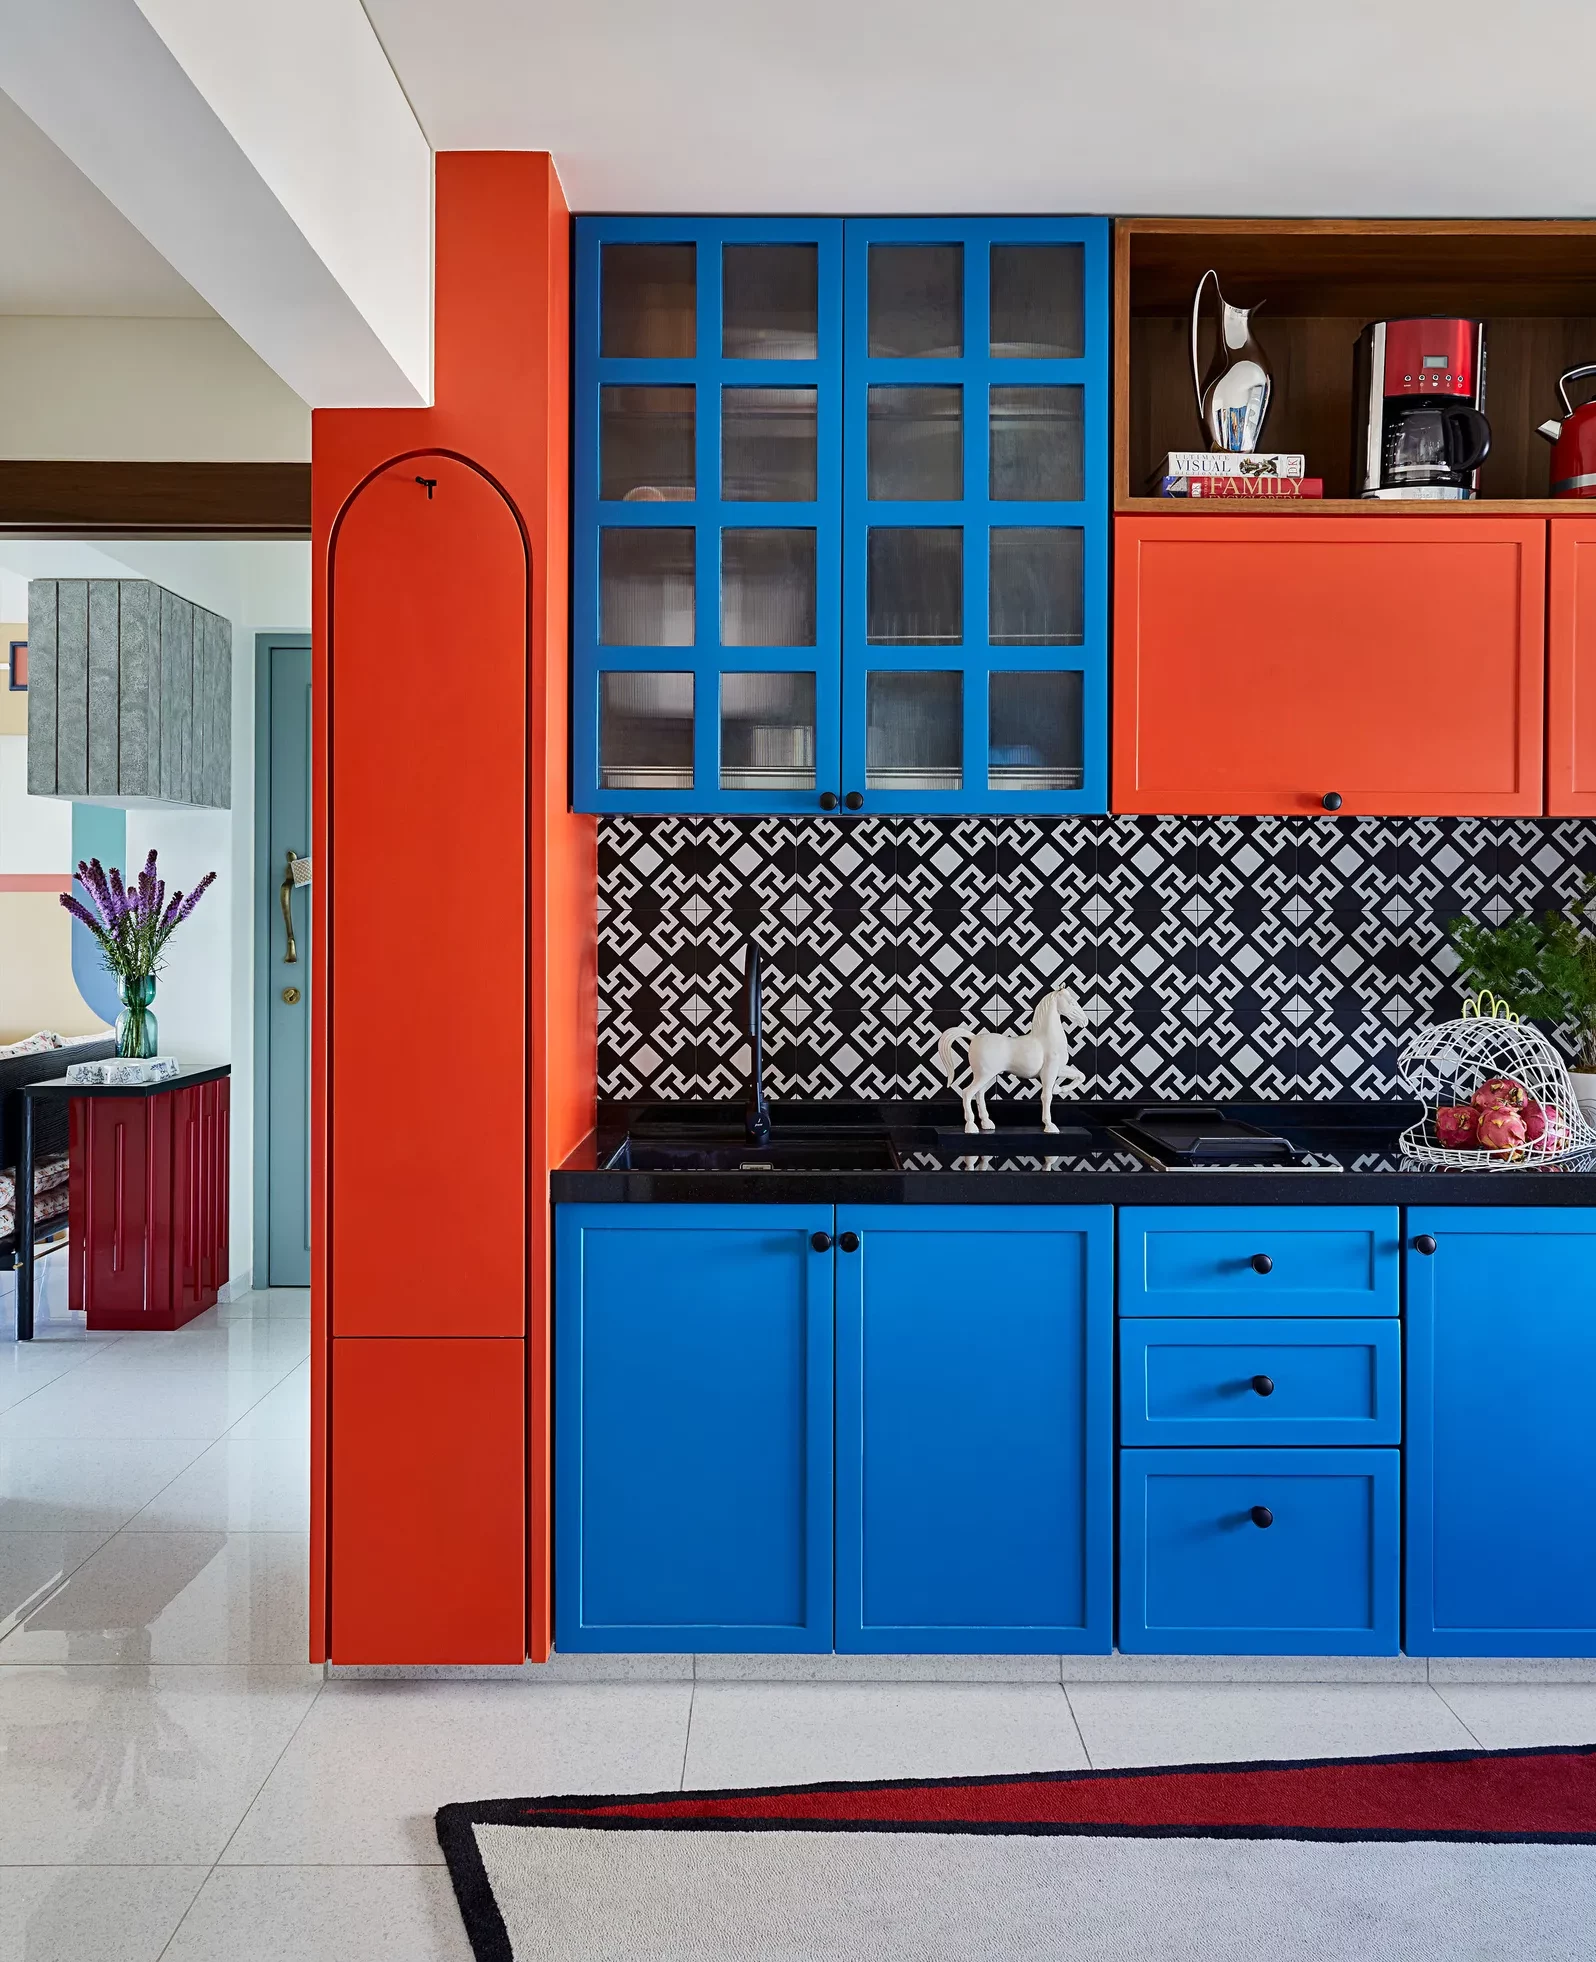 electric blue and red kitchen cabinets with black accents, white & black patterned backsplash